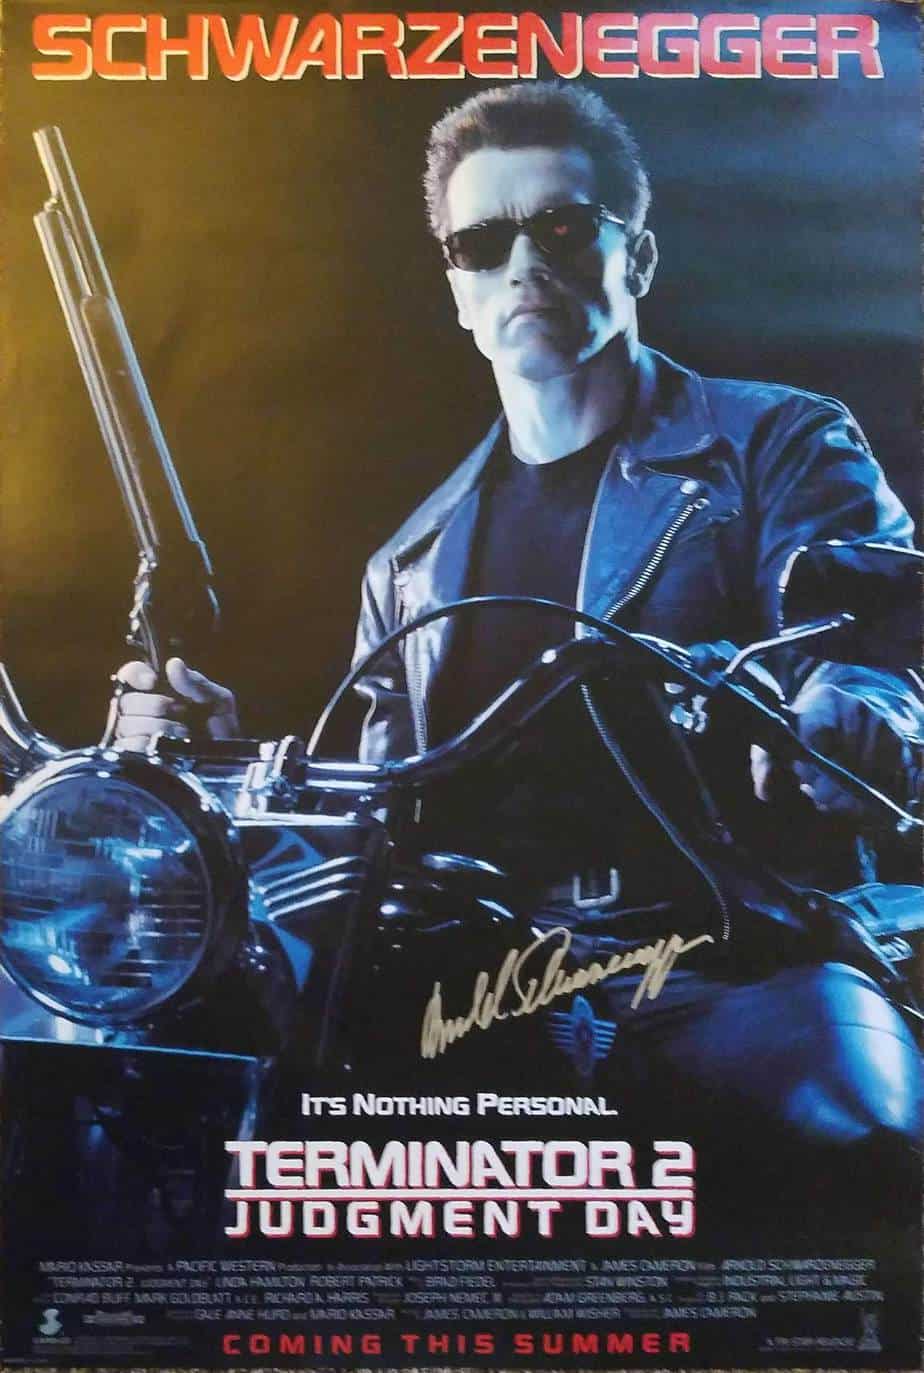 Terminator 2 Judgment day one sheet poster signed by Arnold Schwarzenegger.